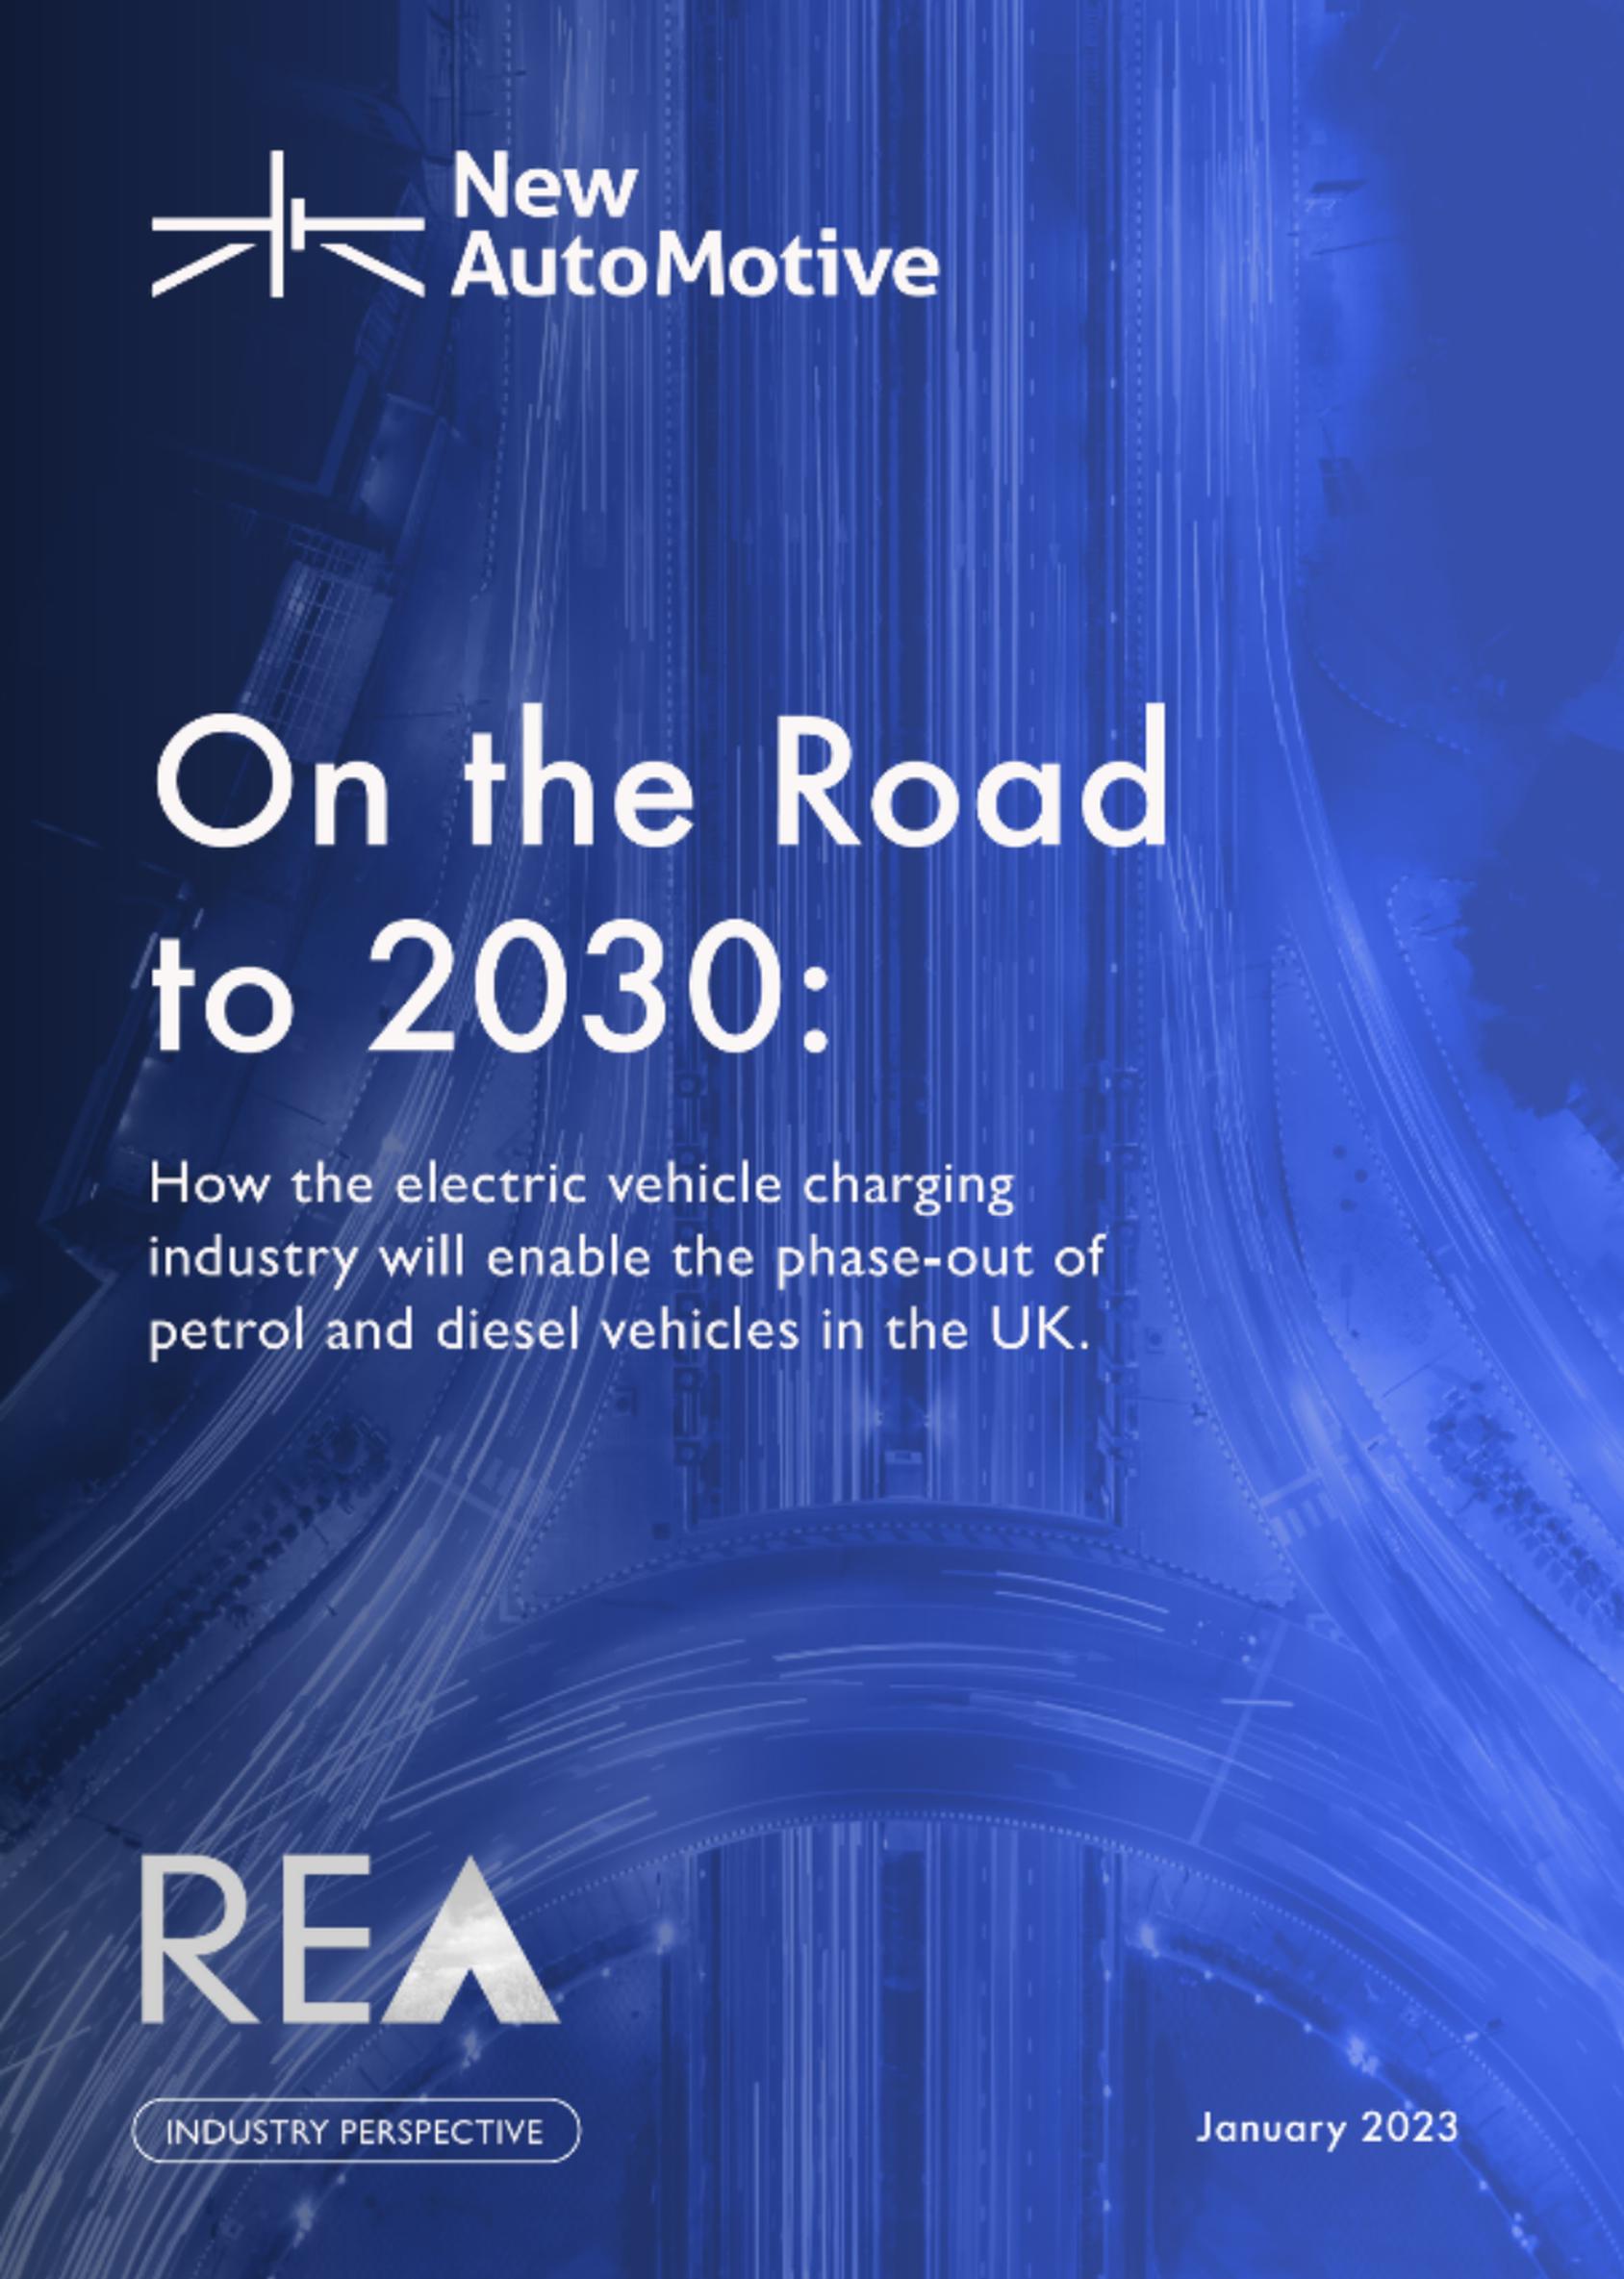 UK chargepoint infrastructure on course to meet 2030 needs, says report